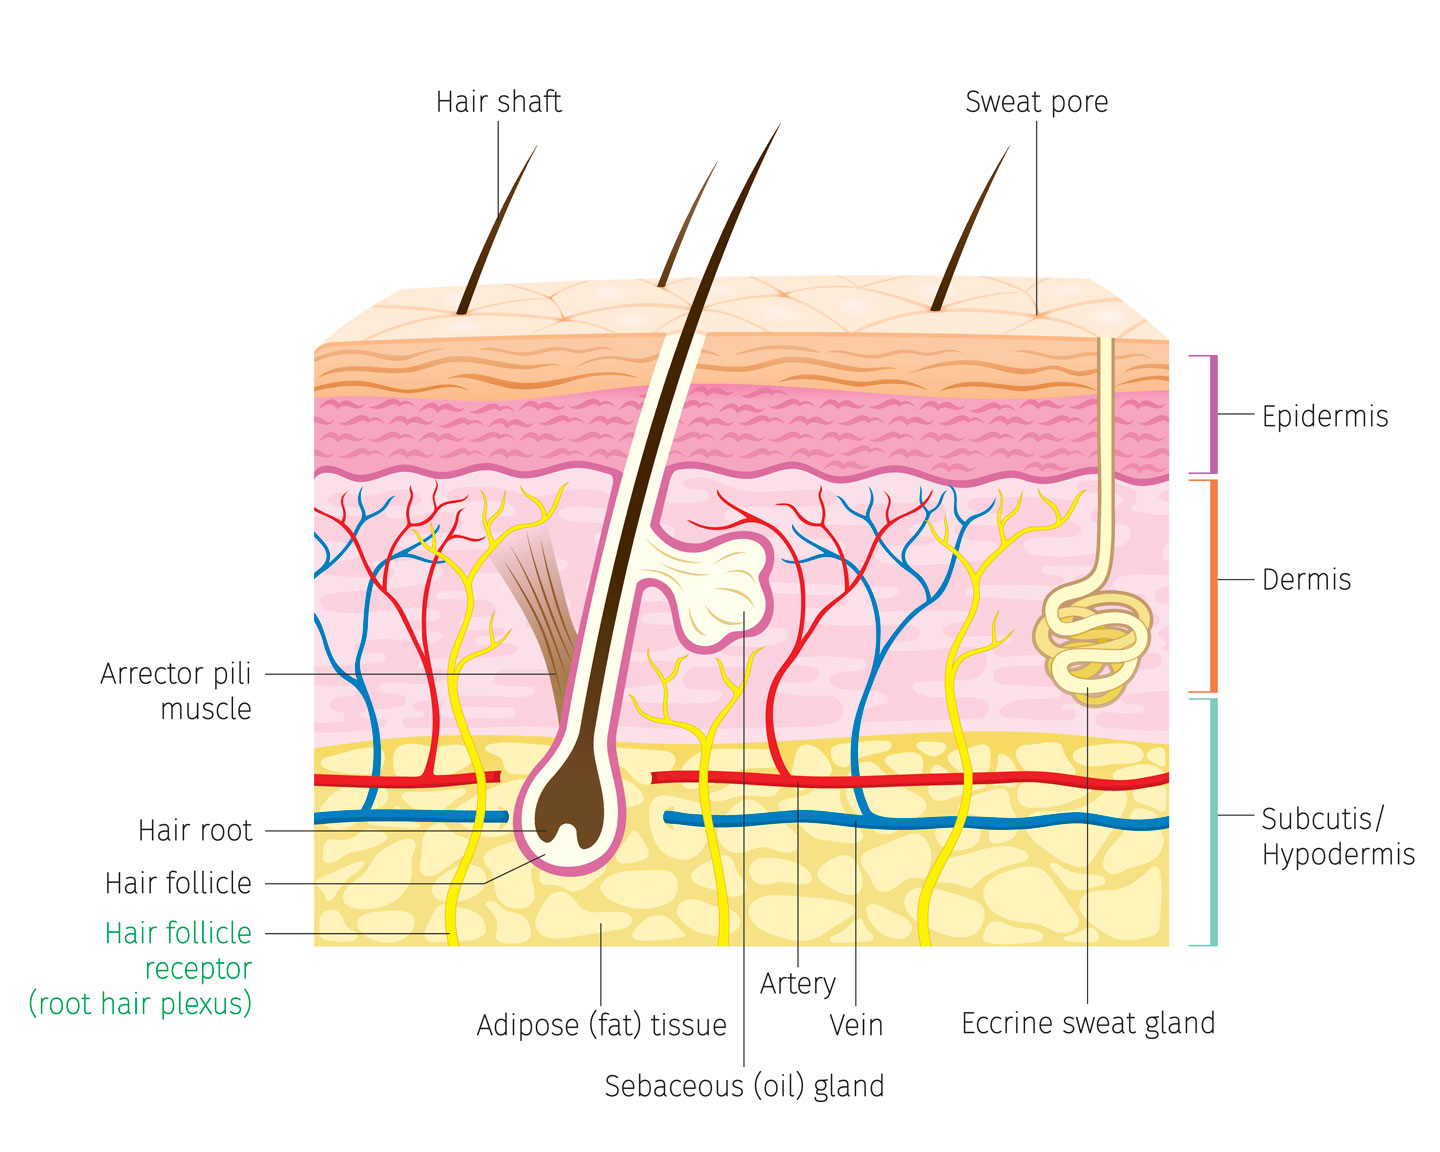 a diagram shows a cross section of human skin to reveal where the hair follicle is in relation to veins, sweat glands and other anatomical features